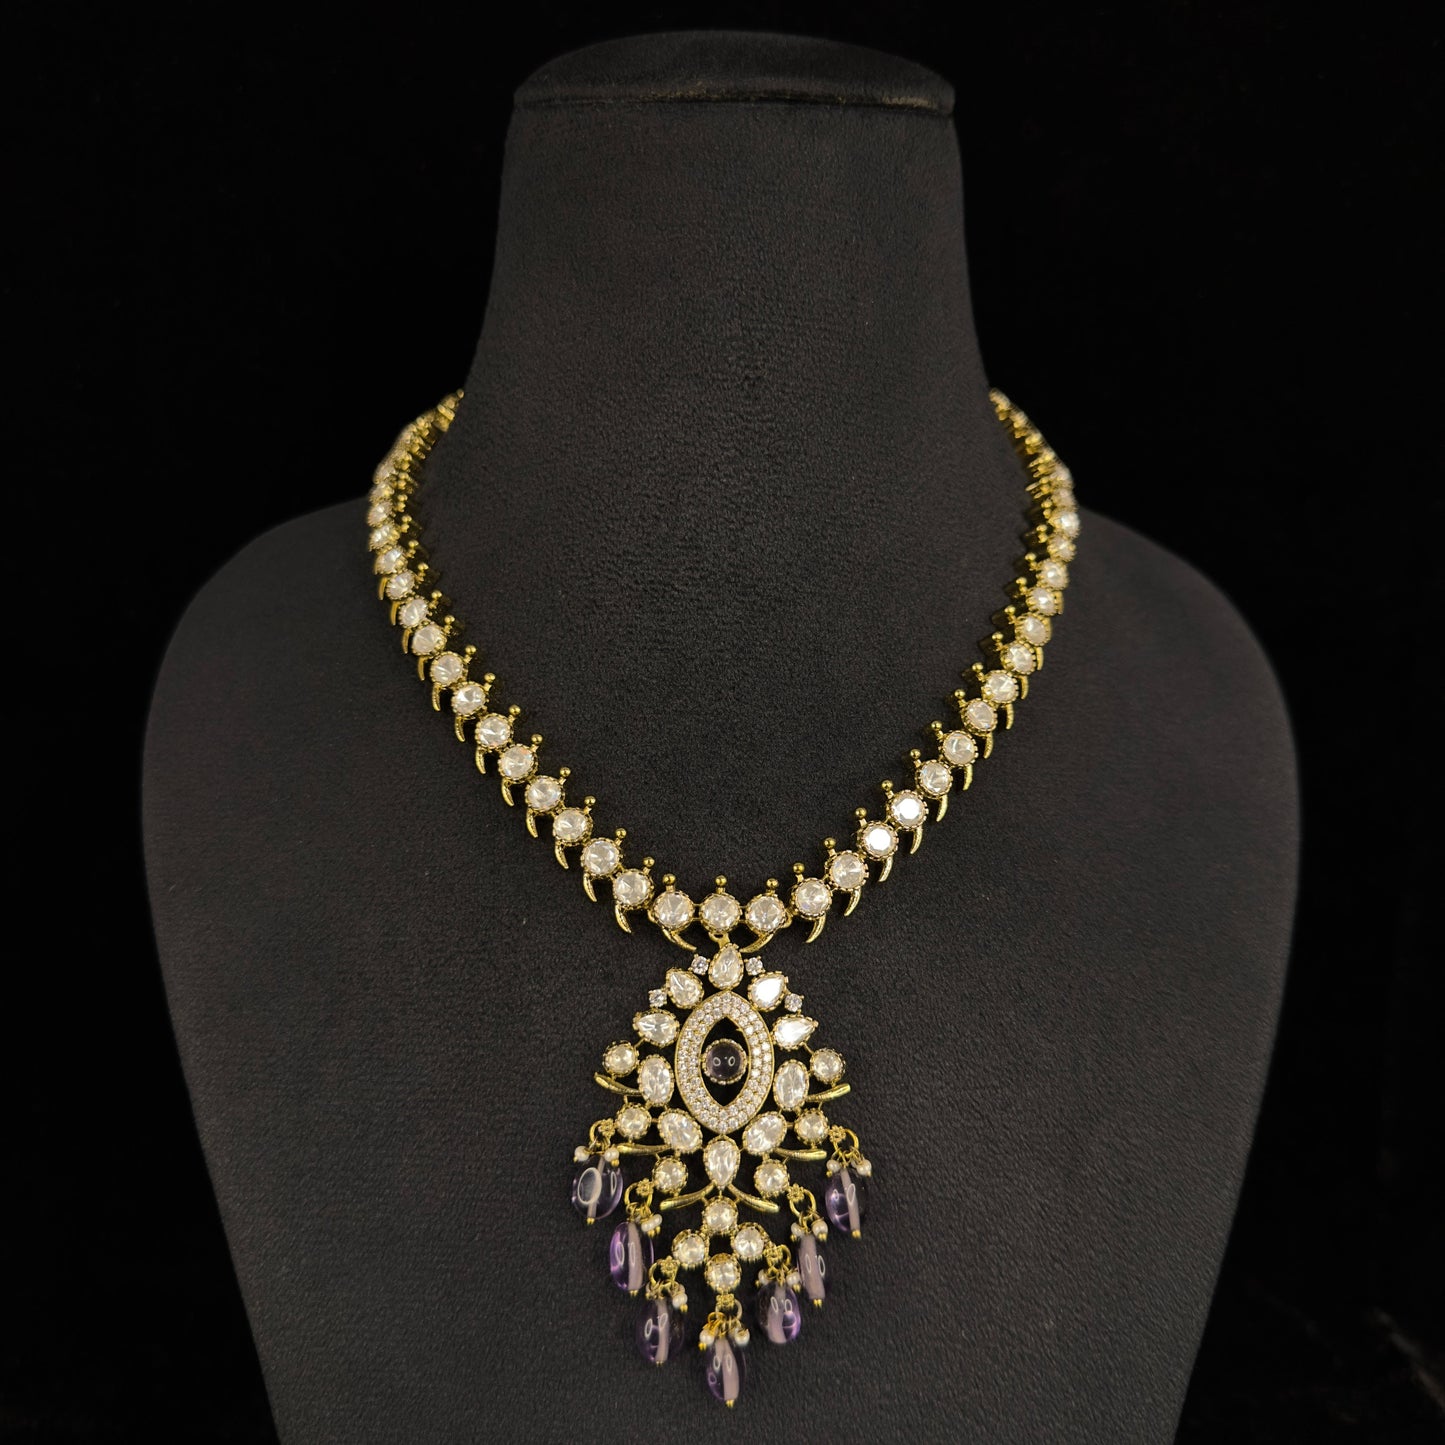 Victorian AD Necklace with push back earrings